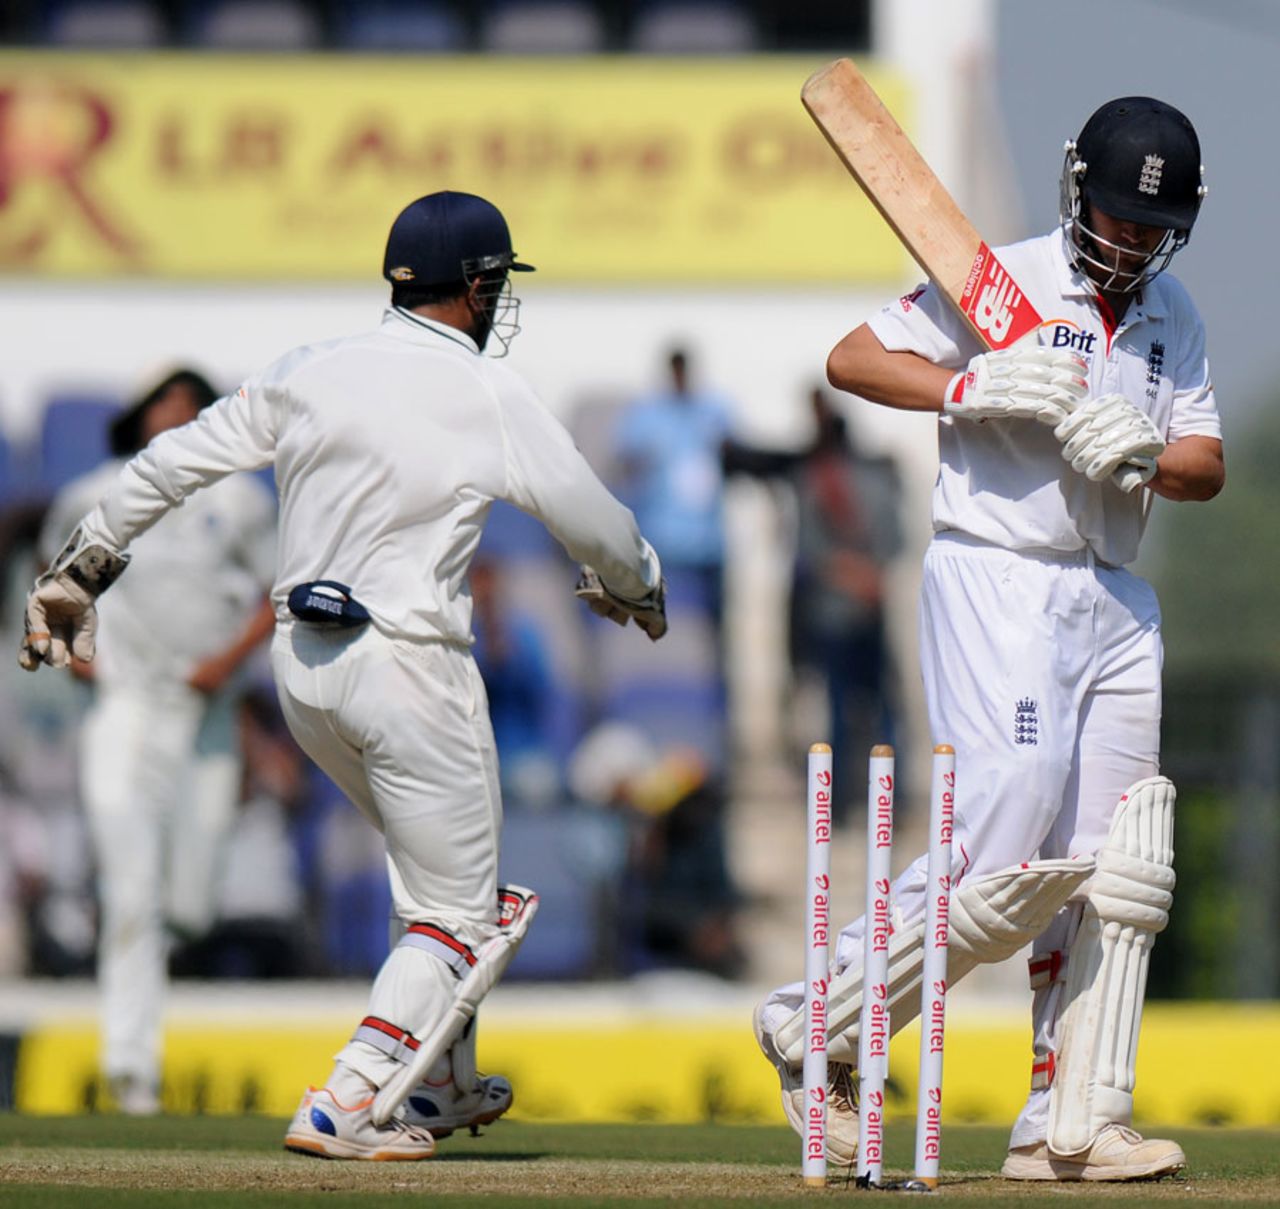 Jonathan Trott shouldered arms and was bowled by Ravindra Jadeja, India v England, 4th Test, Nagpur, 1st day, December 13, 2012